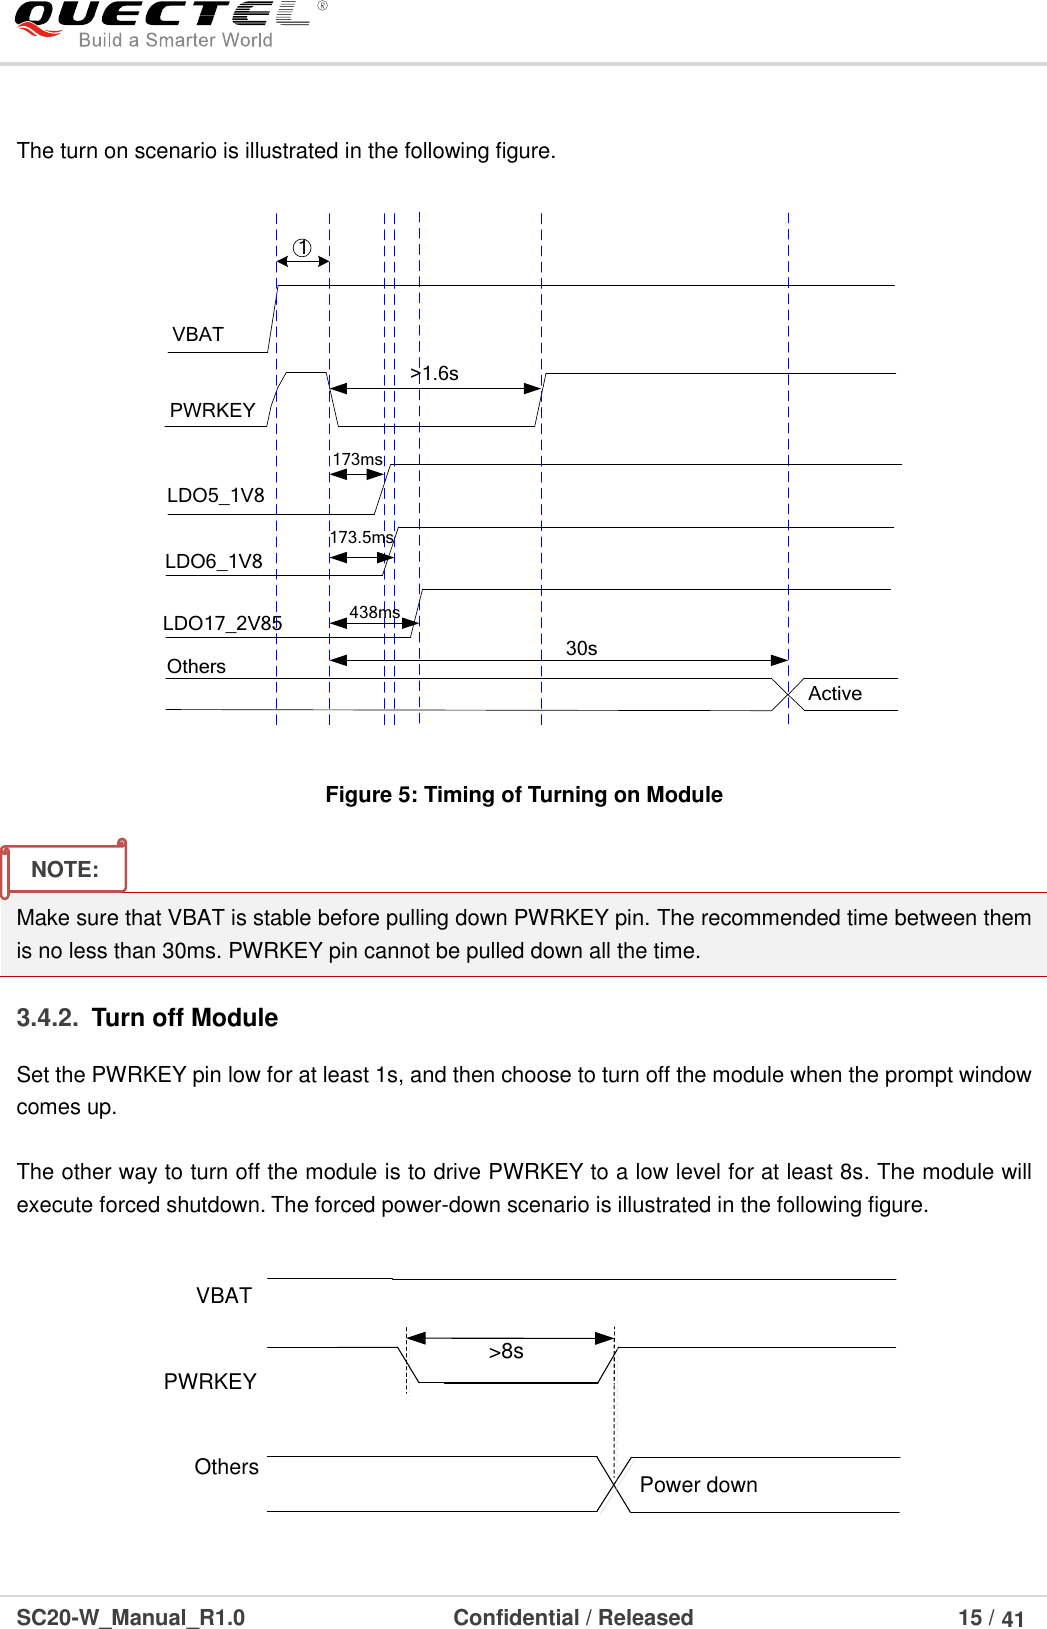 Page 16 of Quectel Wireless Solutions 201709SC20W Smart Module User Manual 